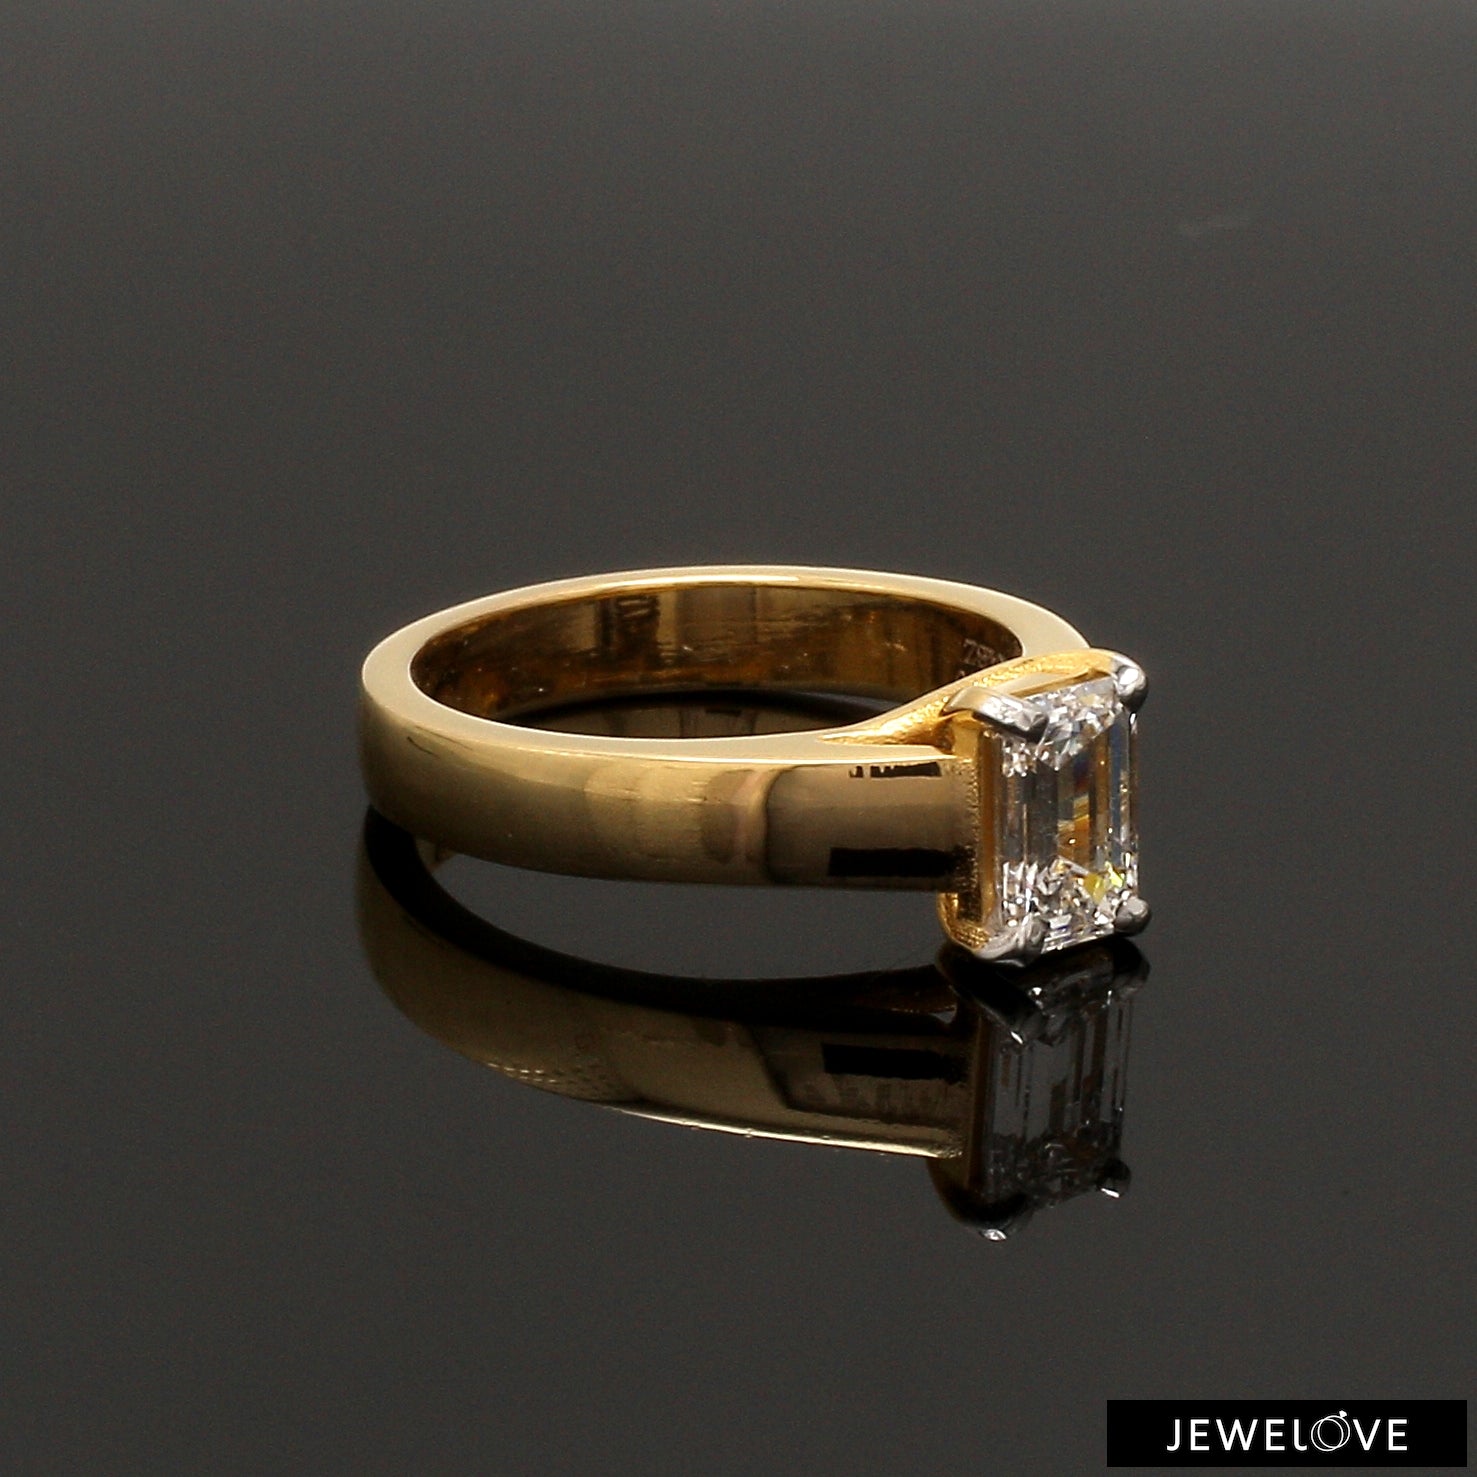 50-Pointer Emerald Cut Solitaire Diamond 18K Yellow Gold Ring JL AU RS EM 127Y-A   Jewelove.US